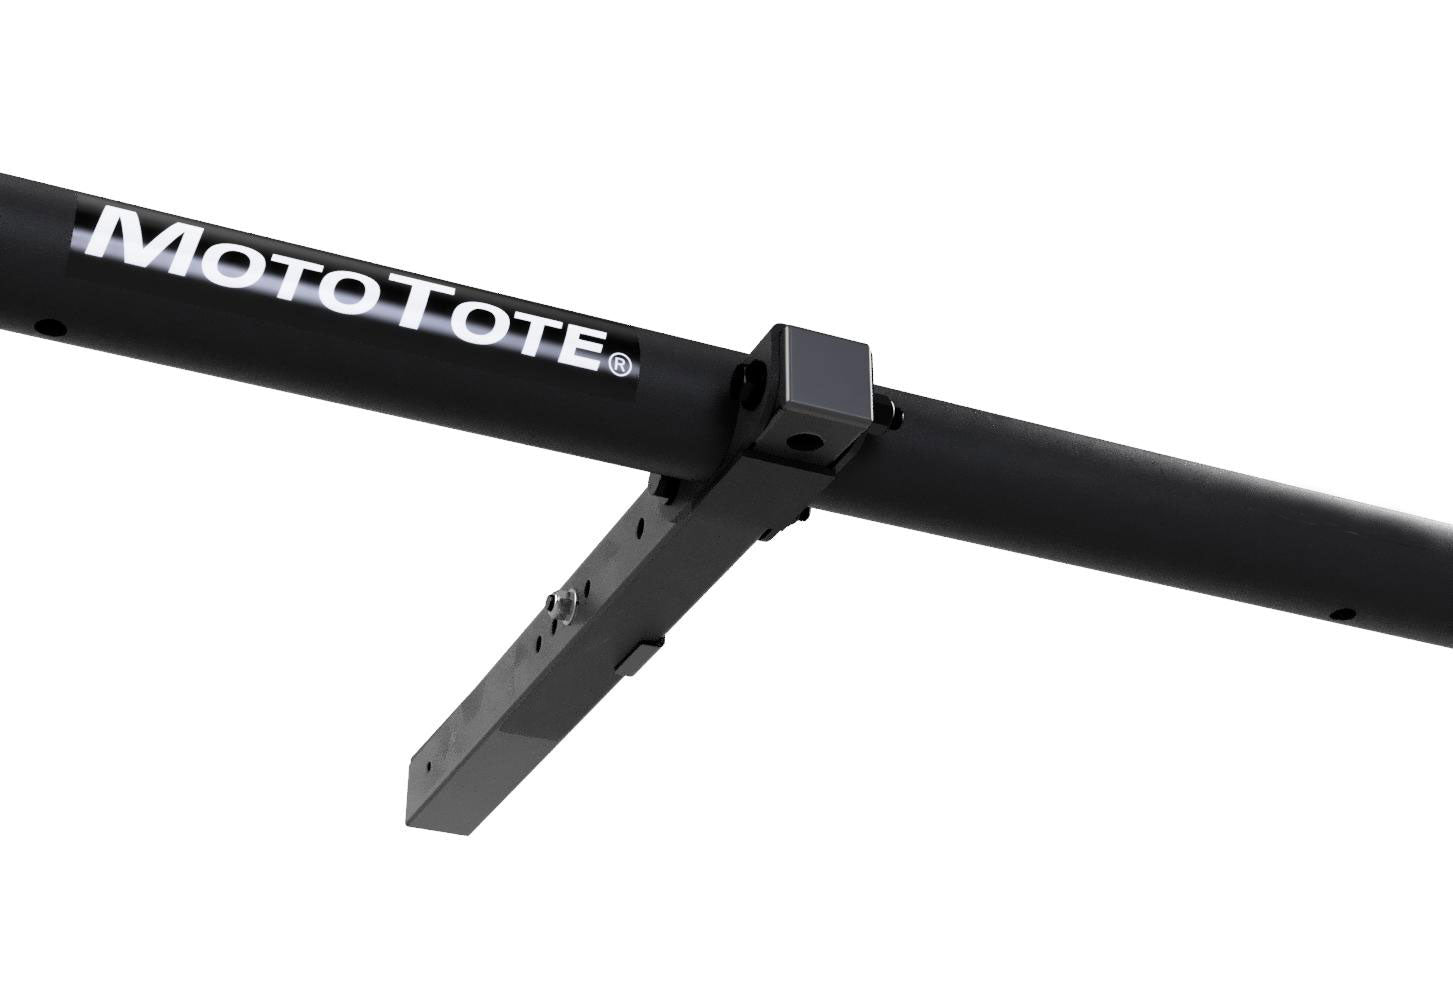 MotoTote Innovative MTX Platform for Motorcycle Hitch Carriers